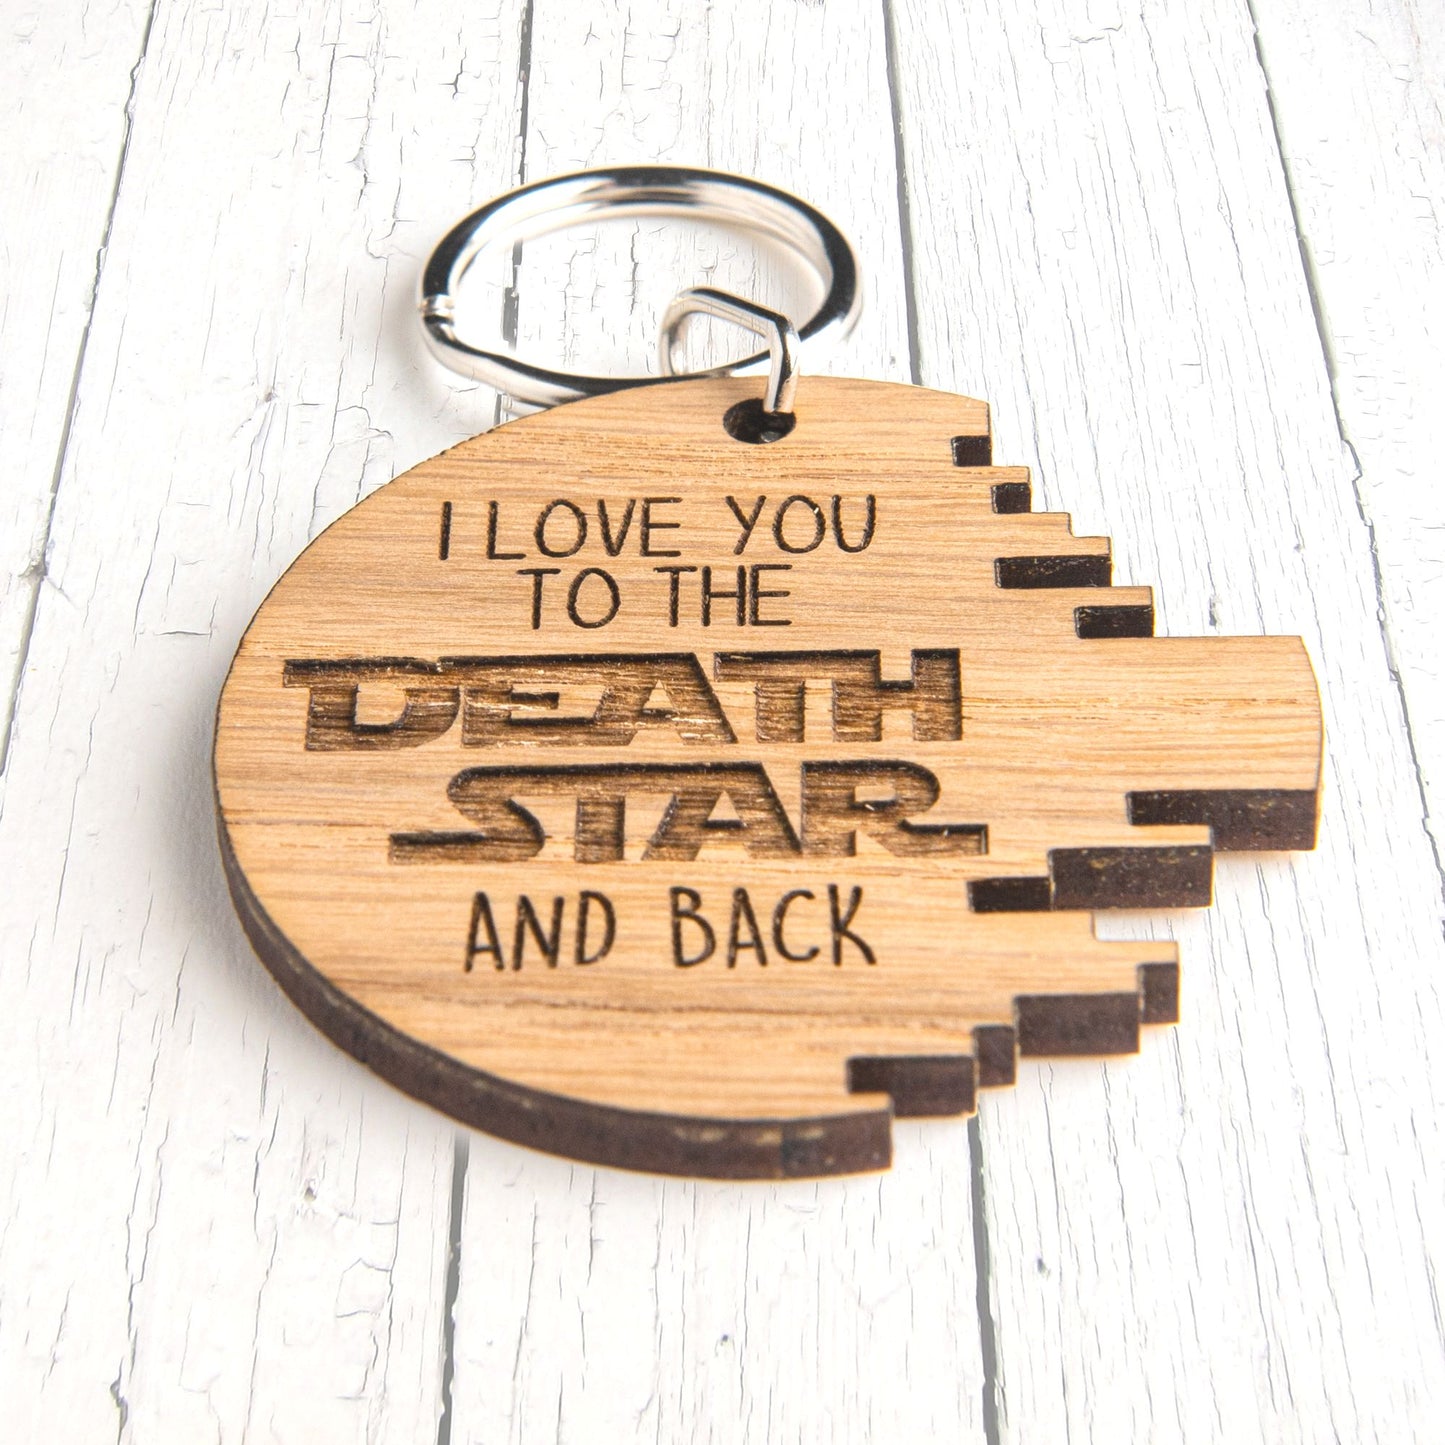 I Love You To The DEATH STAR and BACK - Valentines Day Star Wars Keyring Gift